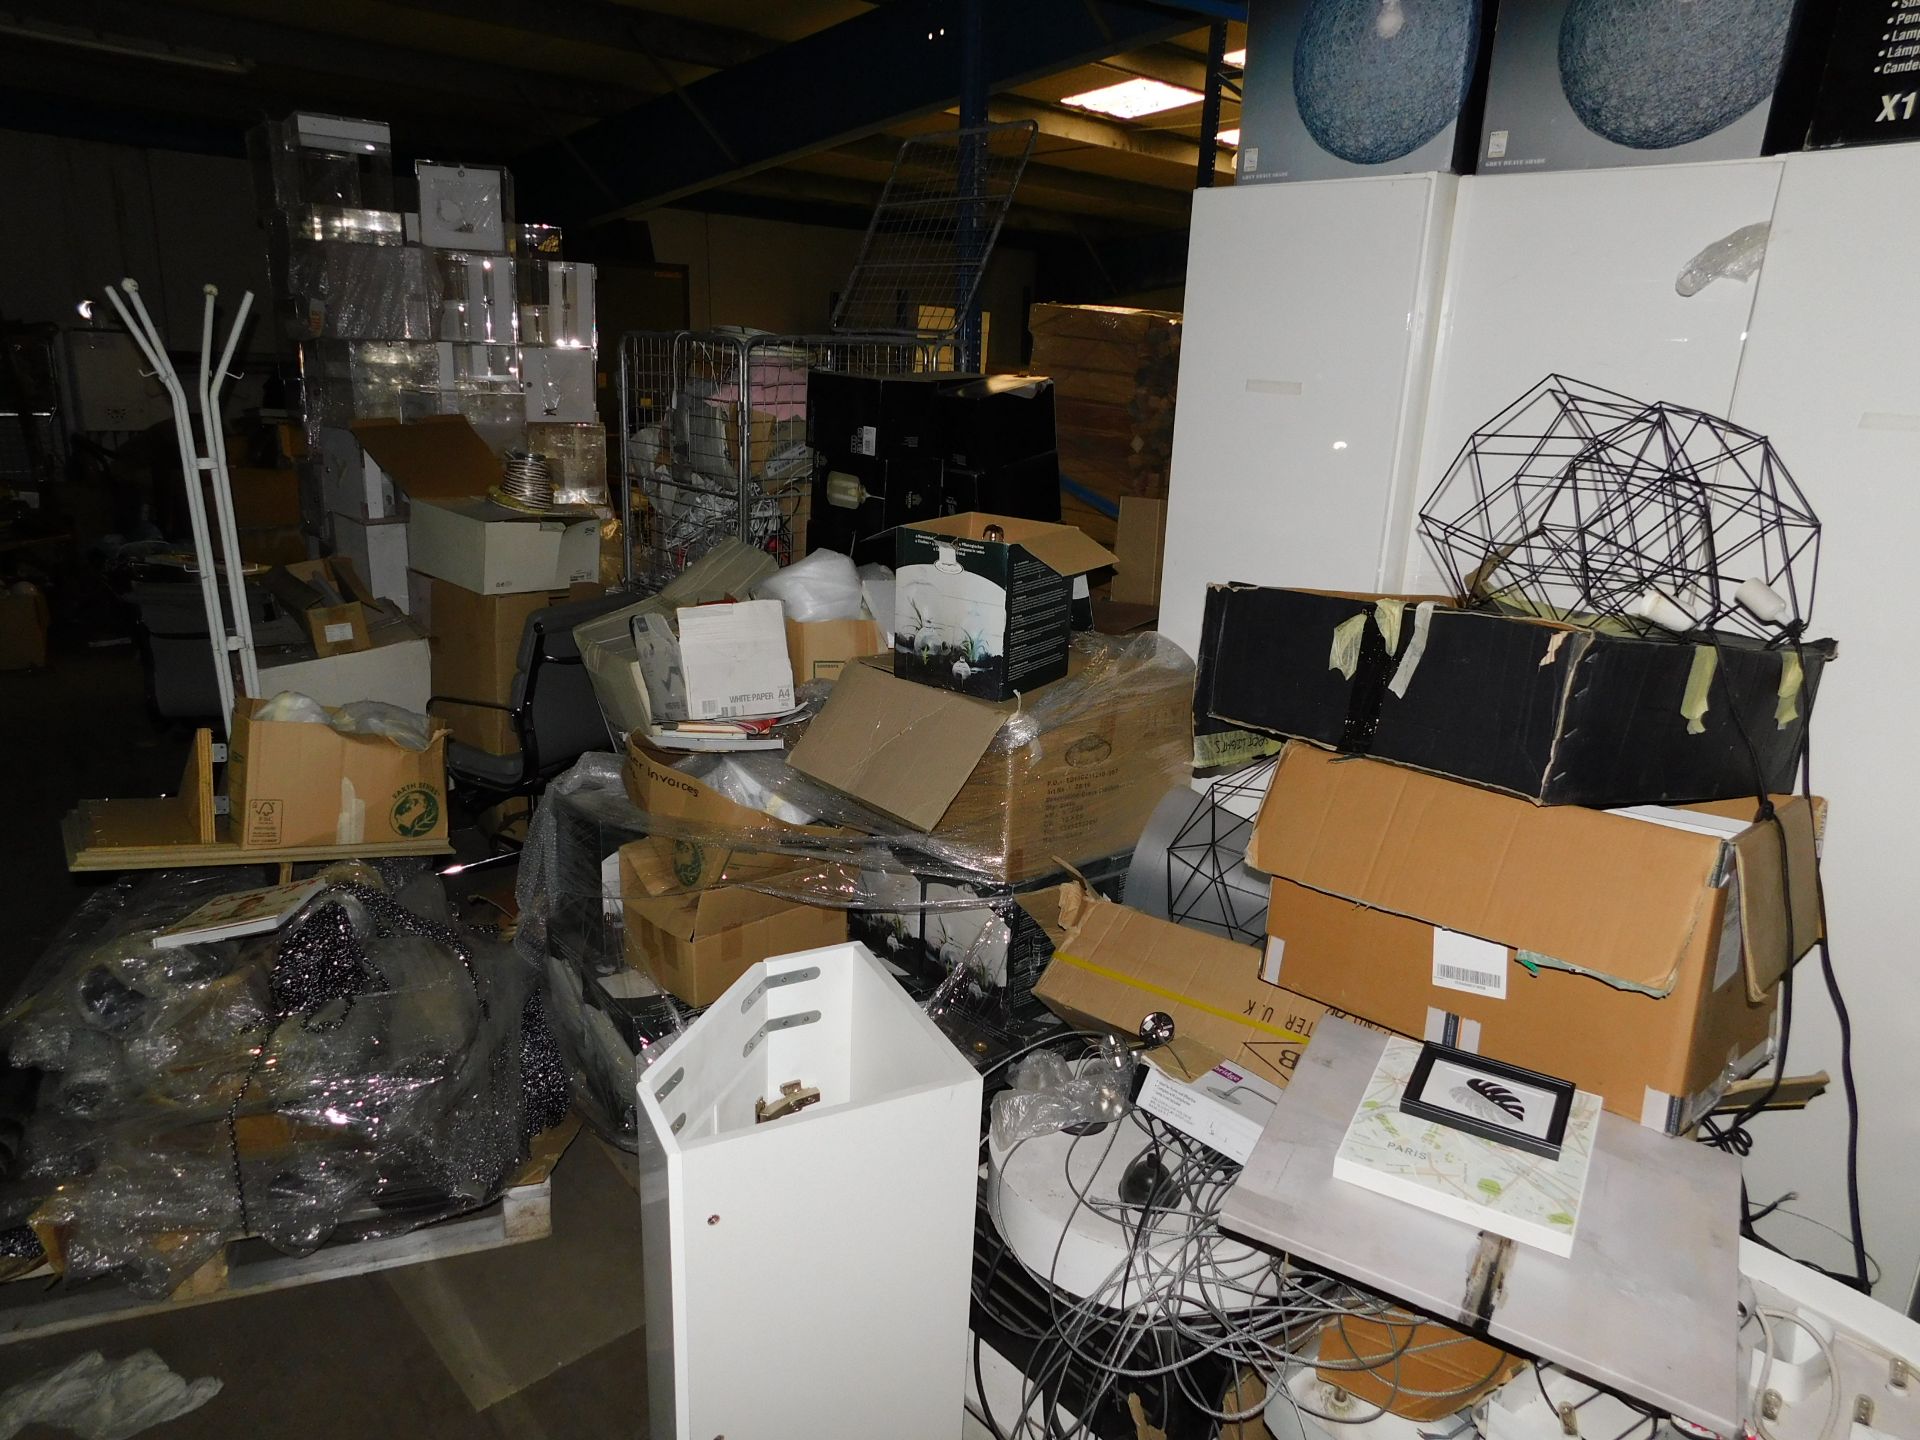 Contents of Mezzanine of Room Dressing Equipment etc. (Located Huntingdon, See General Notes for - Image 5 of 16